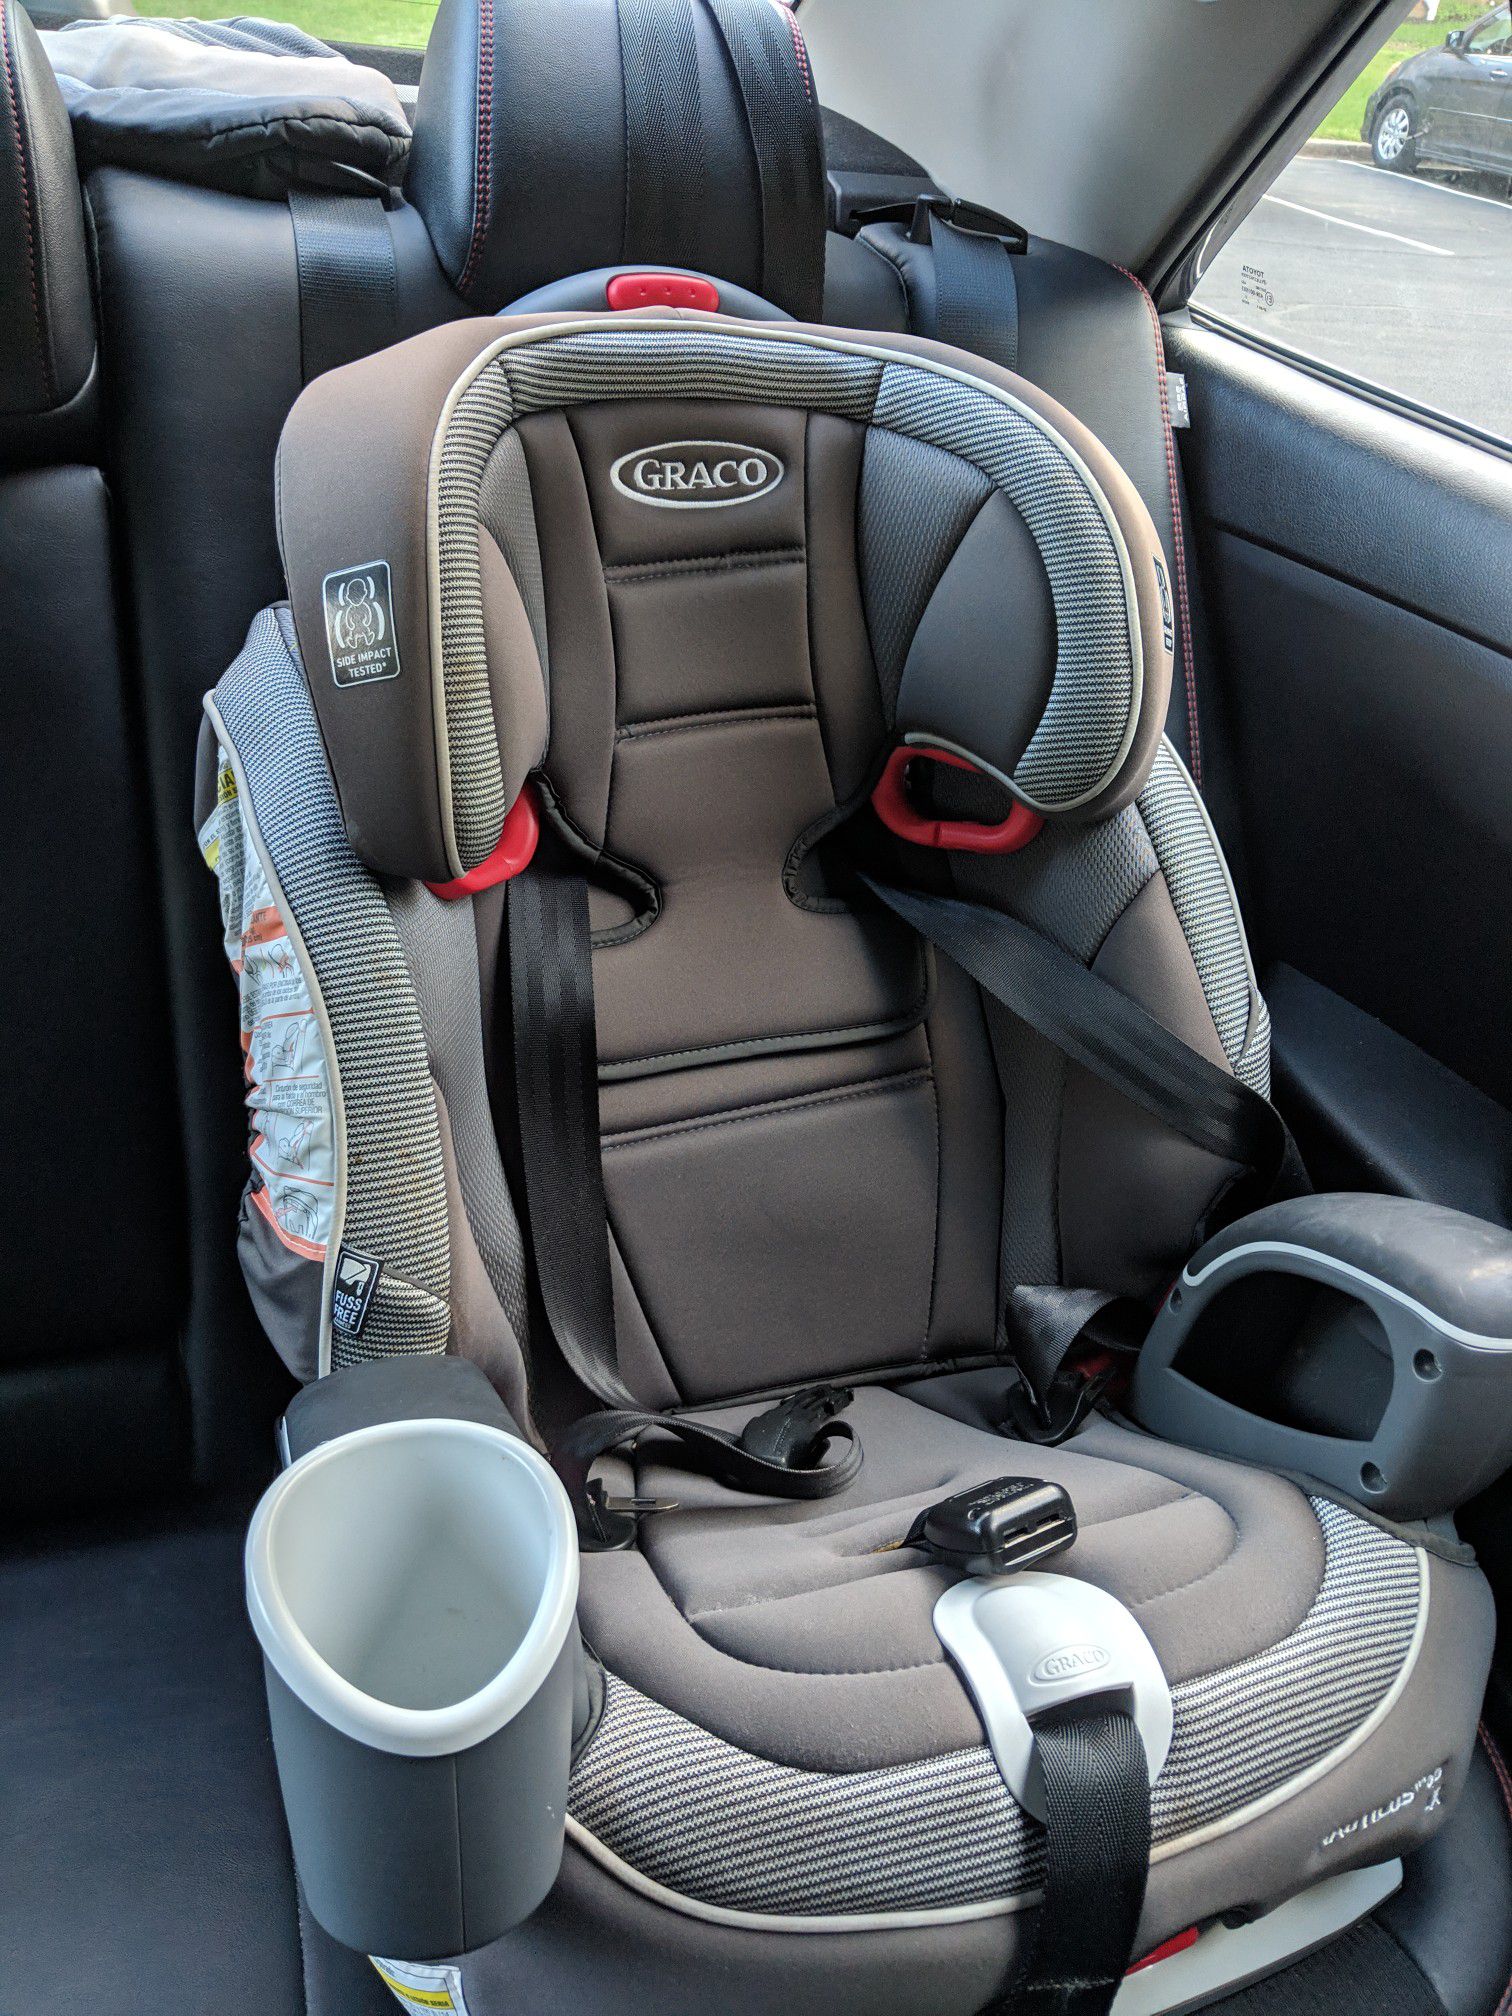 Graco Nautilus 65 lx with booster seat